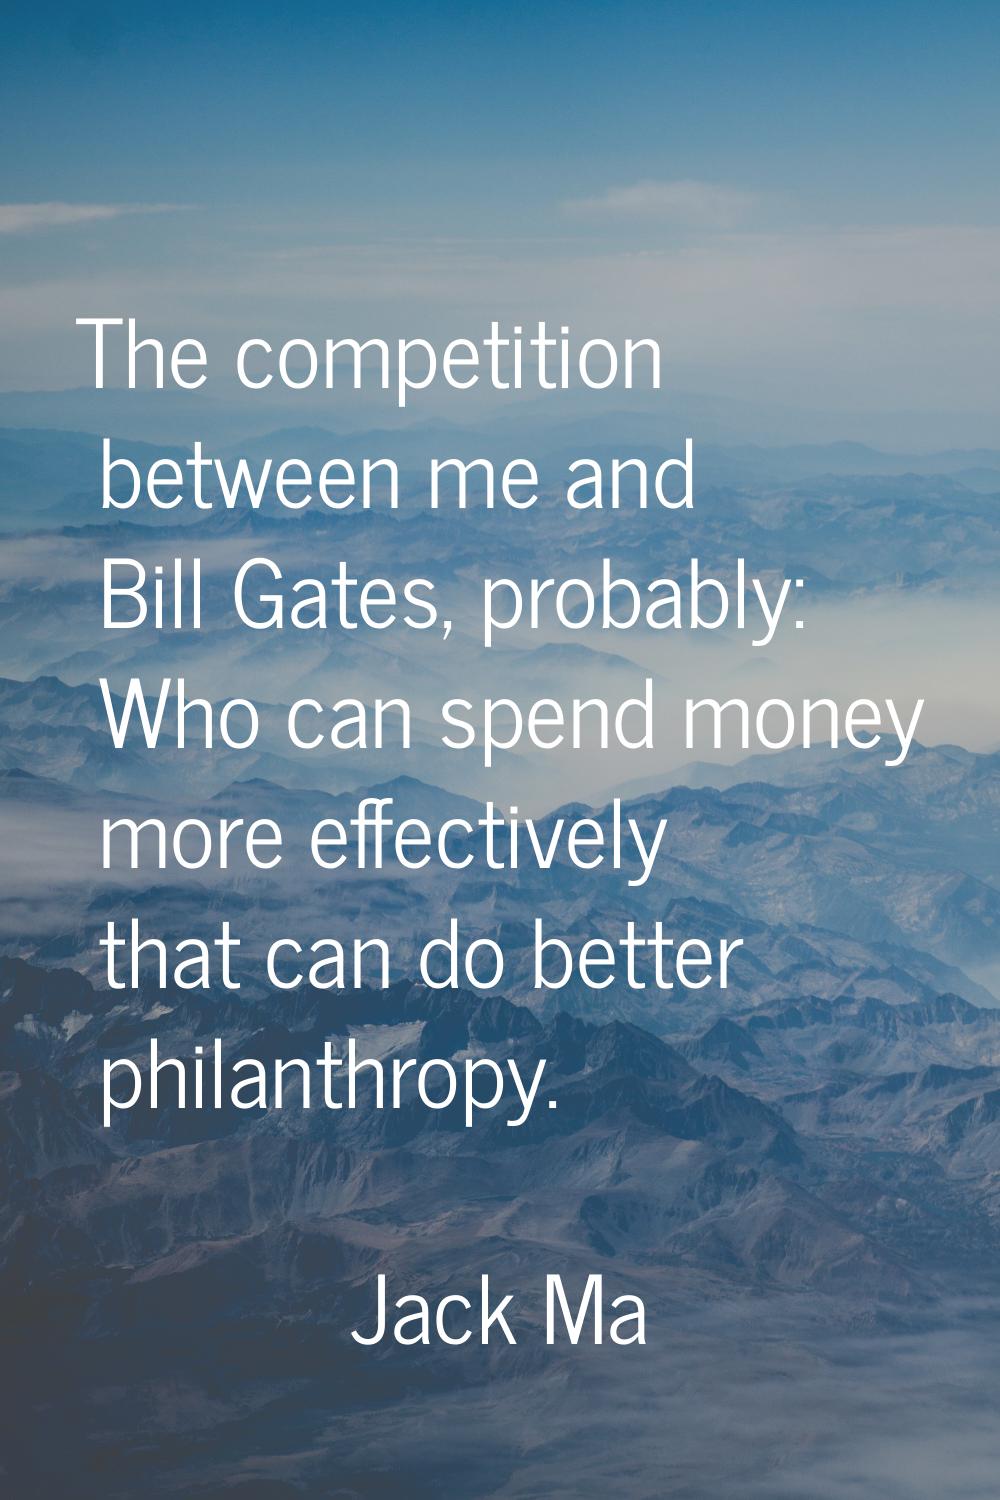 The competition between me and Bill Gates, probably: Who can spend money more effectively that can 